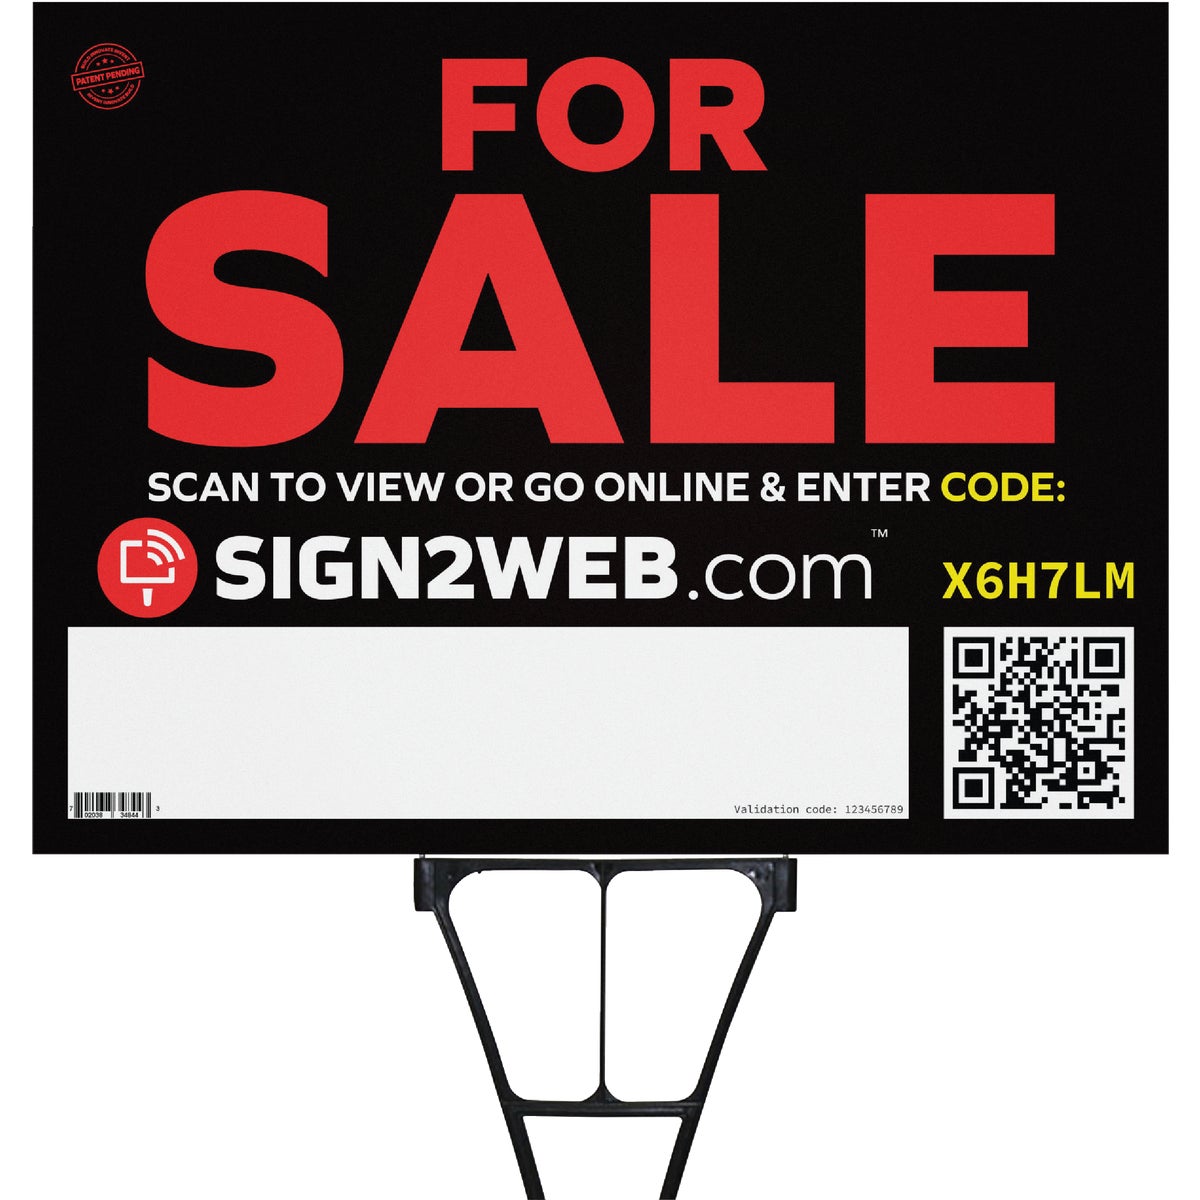 Item 201368, Web enabled For Sale sign showcases your sale with photos and details.